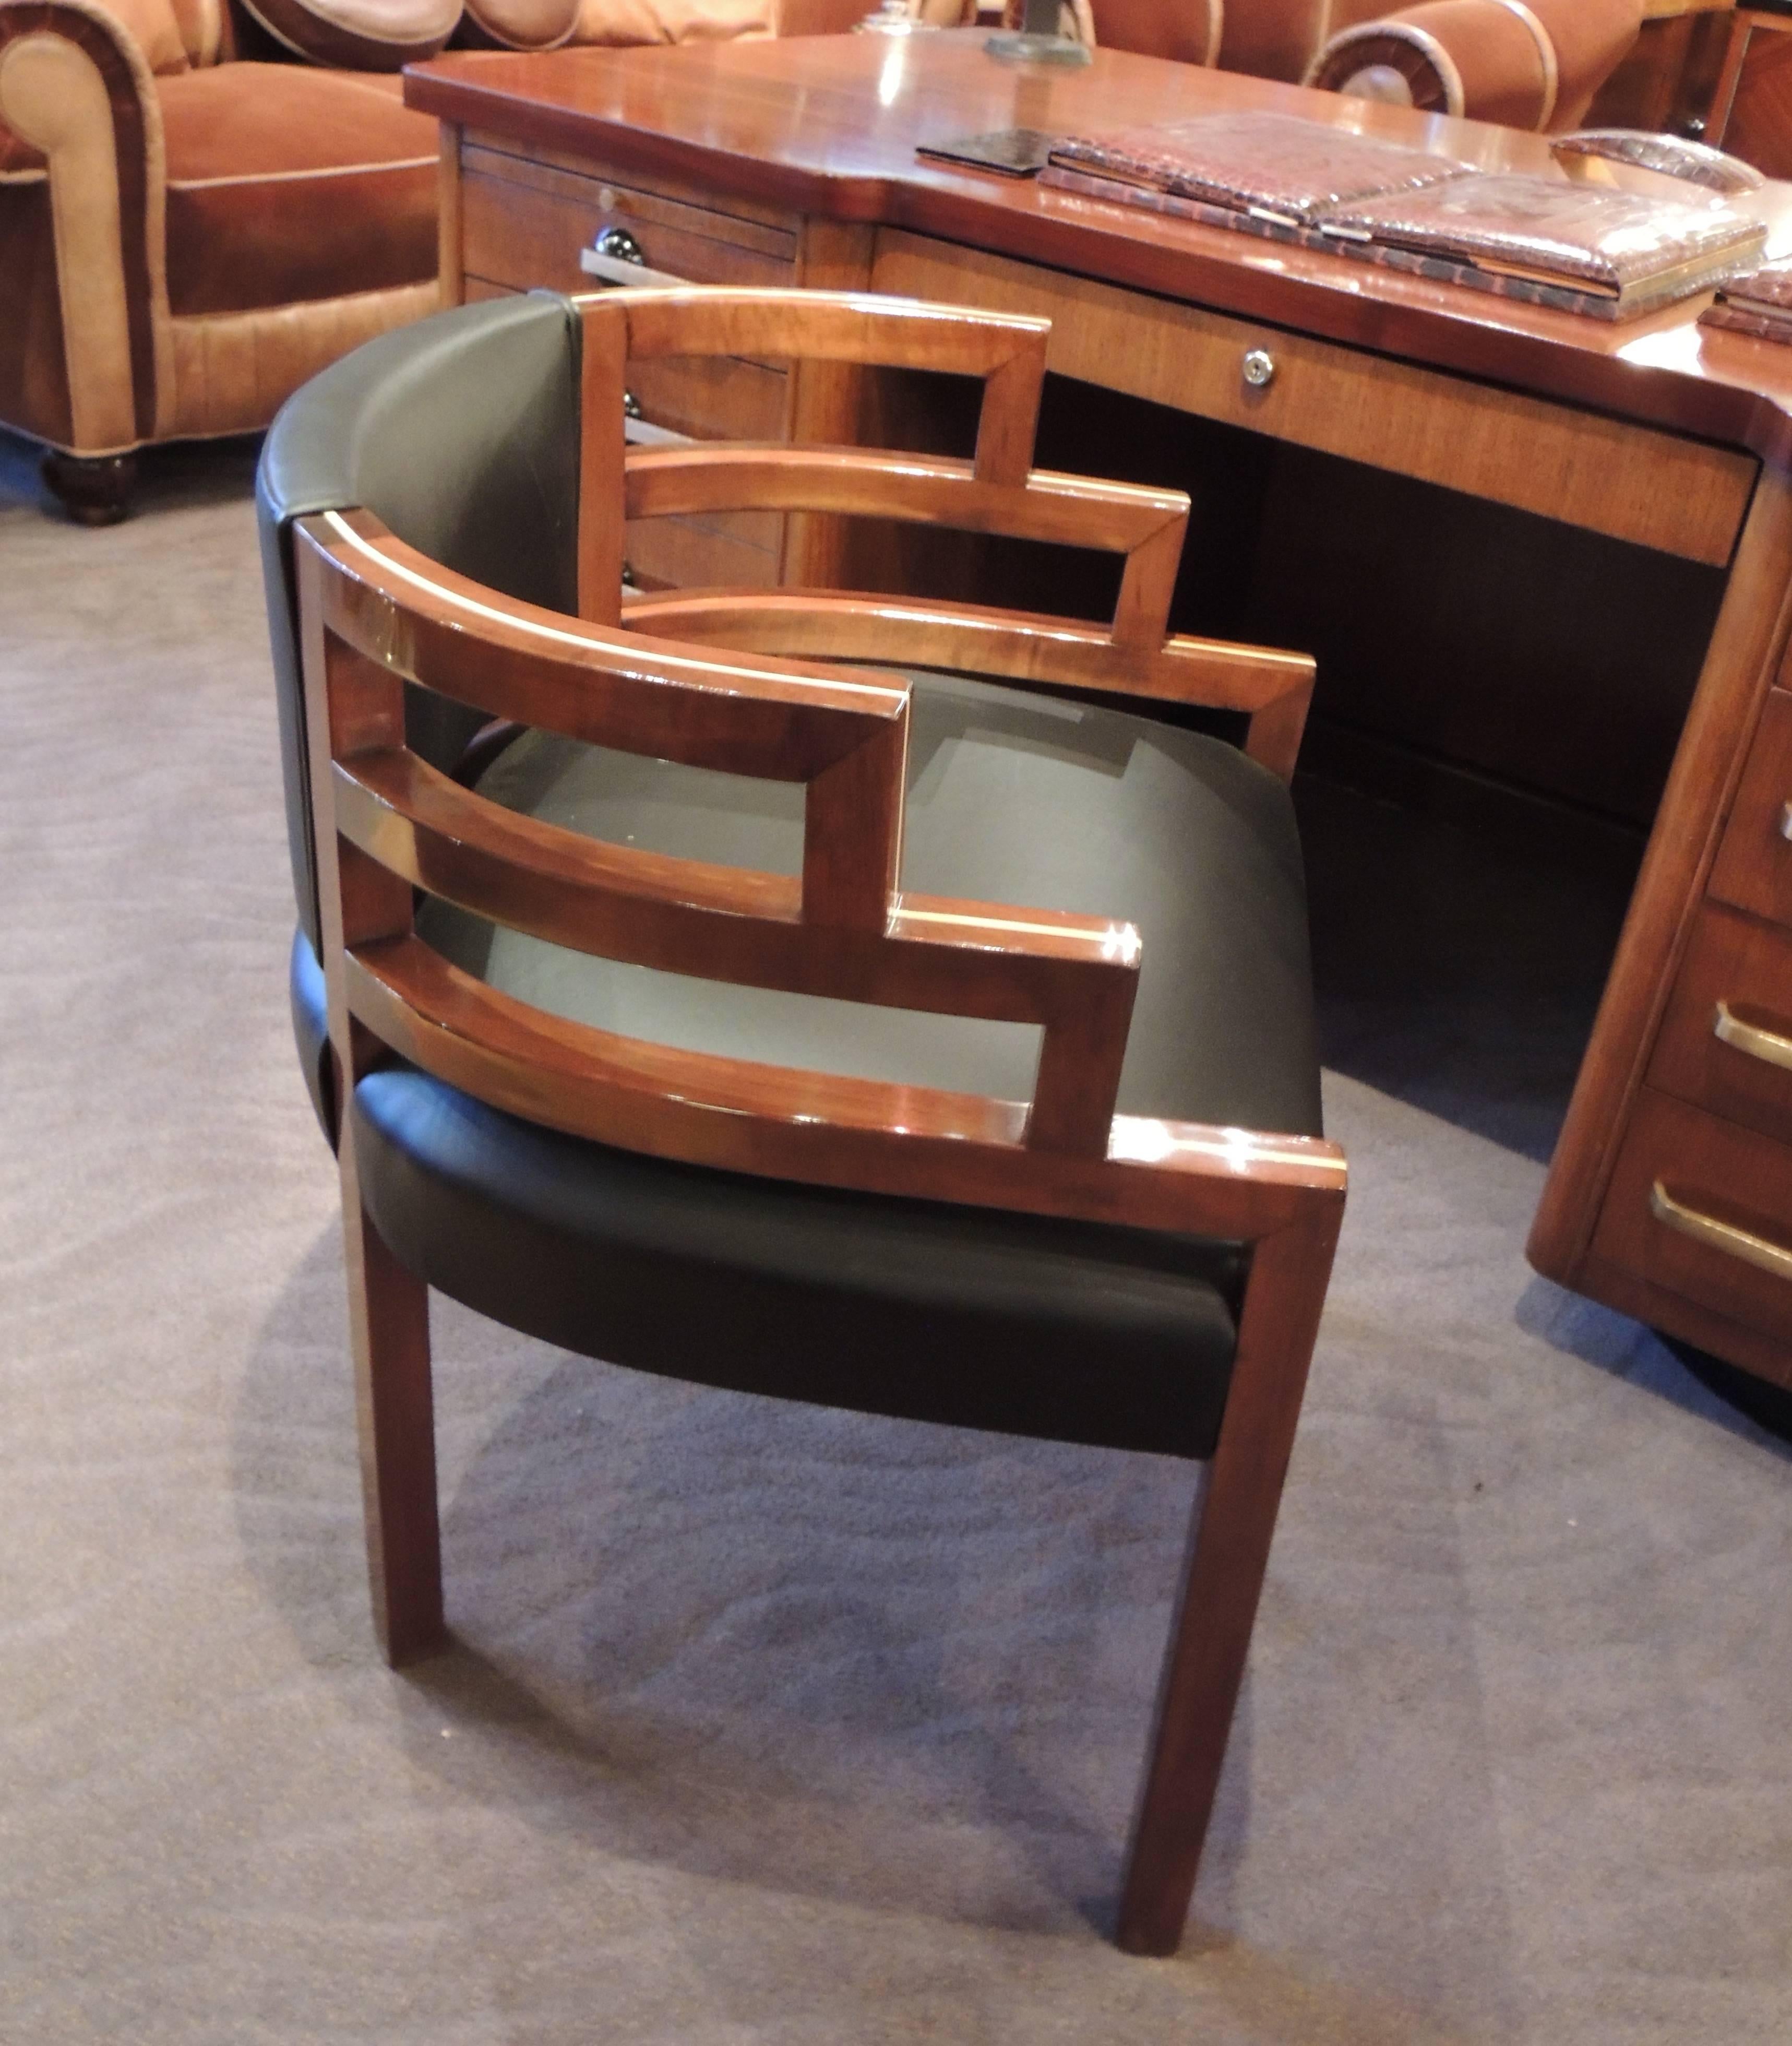 These Art Deco chairs in the style of KEM Weber were custom made exclusively for Art Deco collection. They combine a modernist stair-stepped design with comfort and upholstery that improves upon the original. The wood frames are solid with a medium